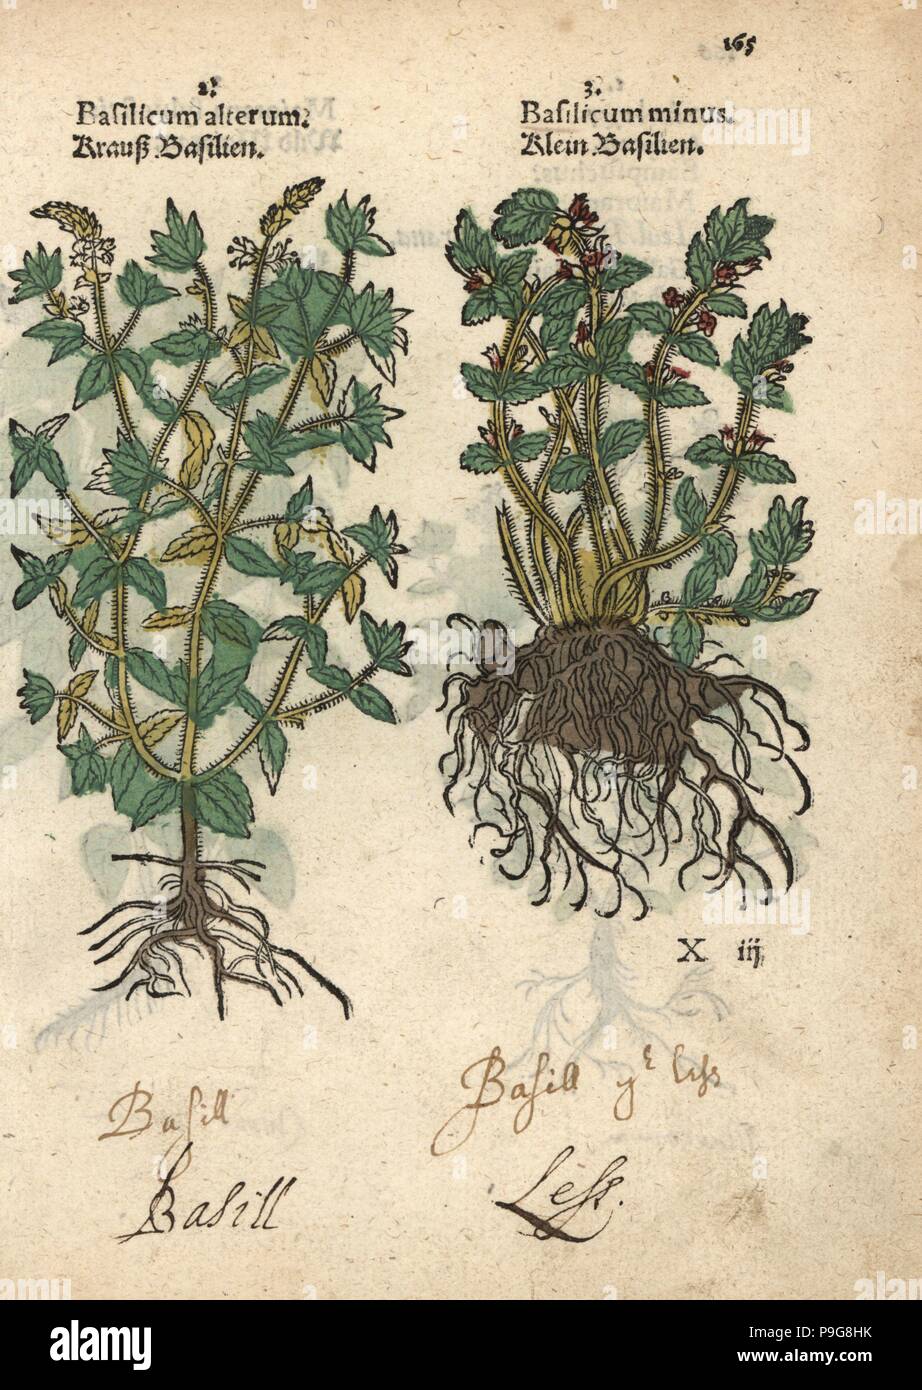 Basil varieties, Ocimum basilicum. Handcoloured woodblock engraving of a botanical illustration from Adam Lonicer's Krauterbuch, or Herbal, Frankfurt, 1557. This from a 17th century pirate edition or atlas of illustrations only, with captions in Latin, Greek, French, Italian, German, and in English manuscript. Stock Photo